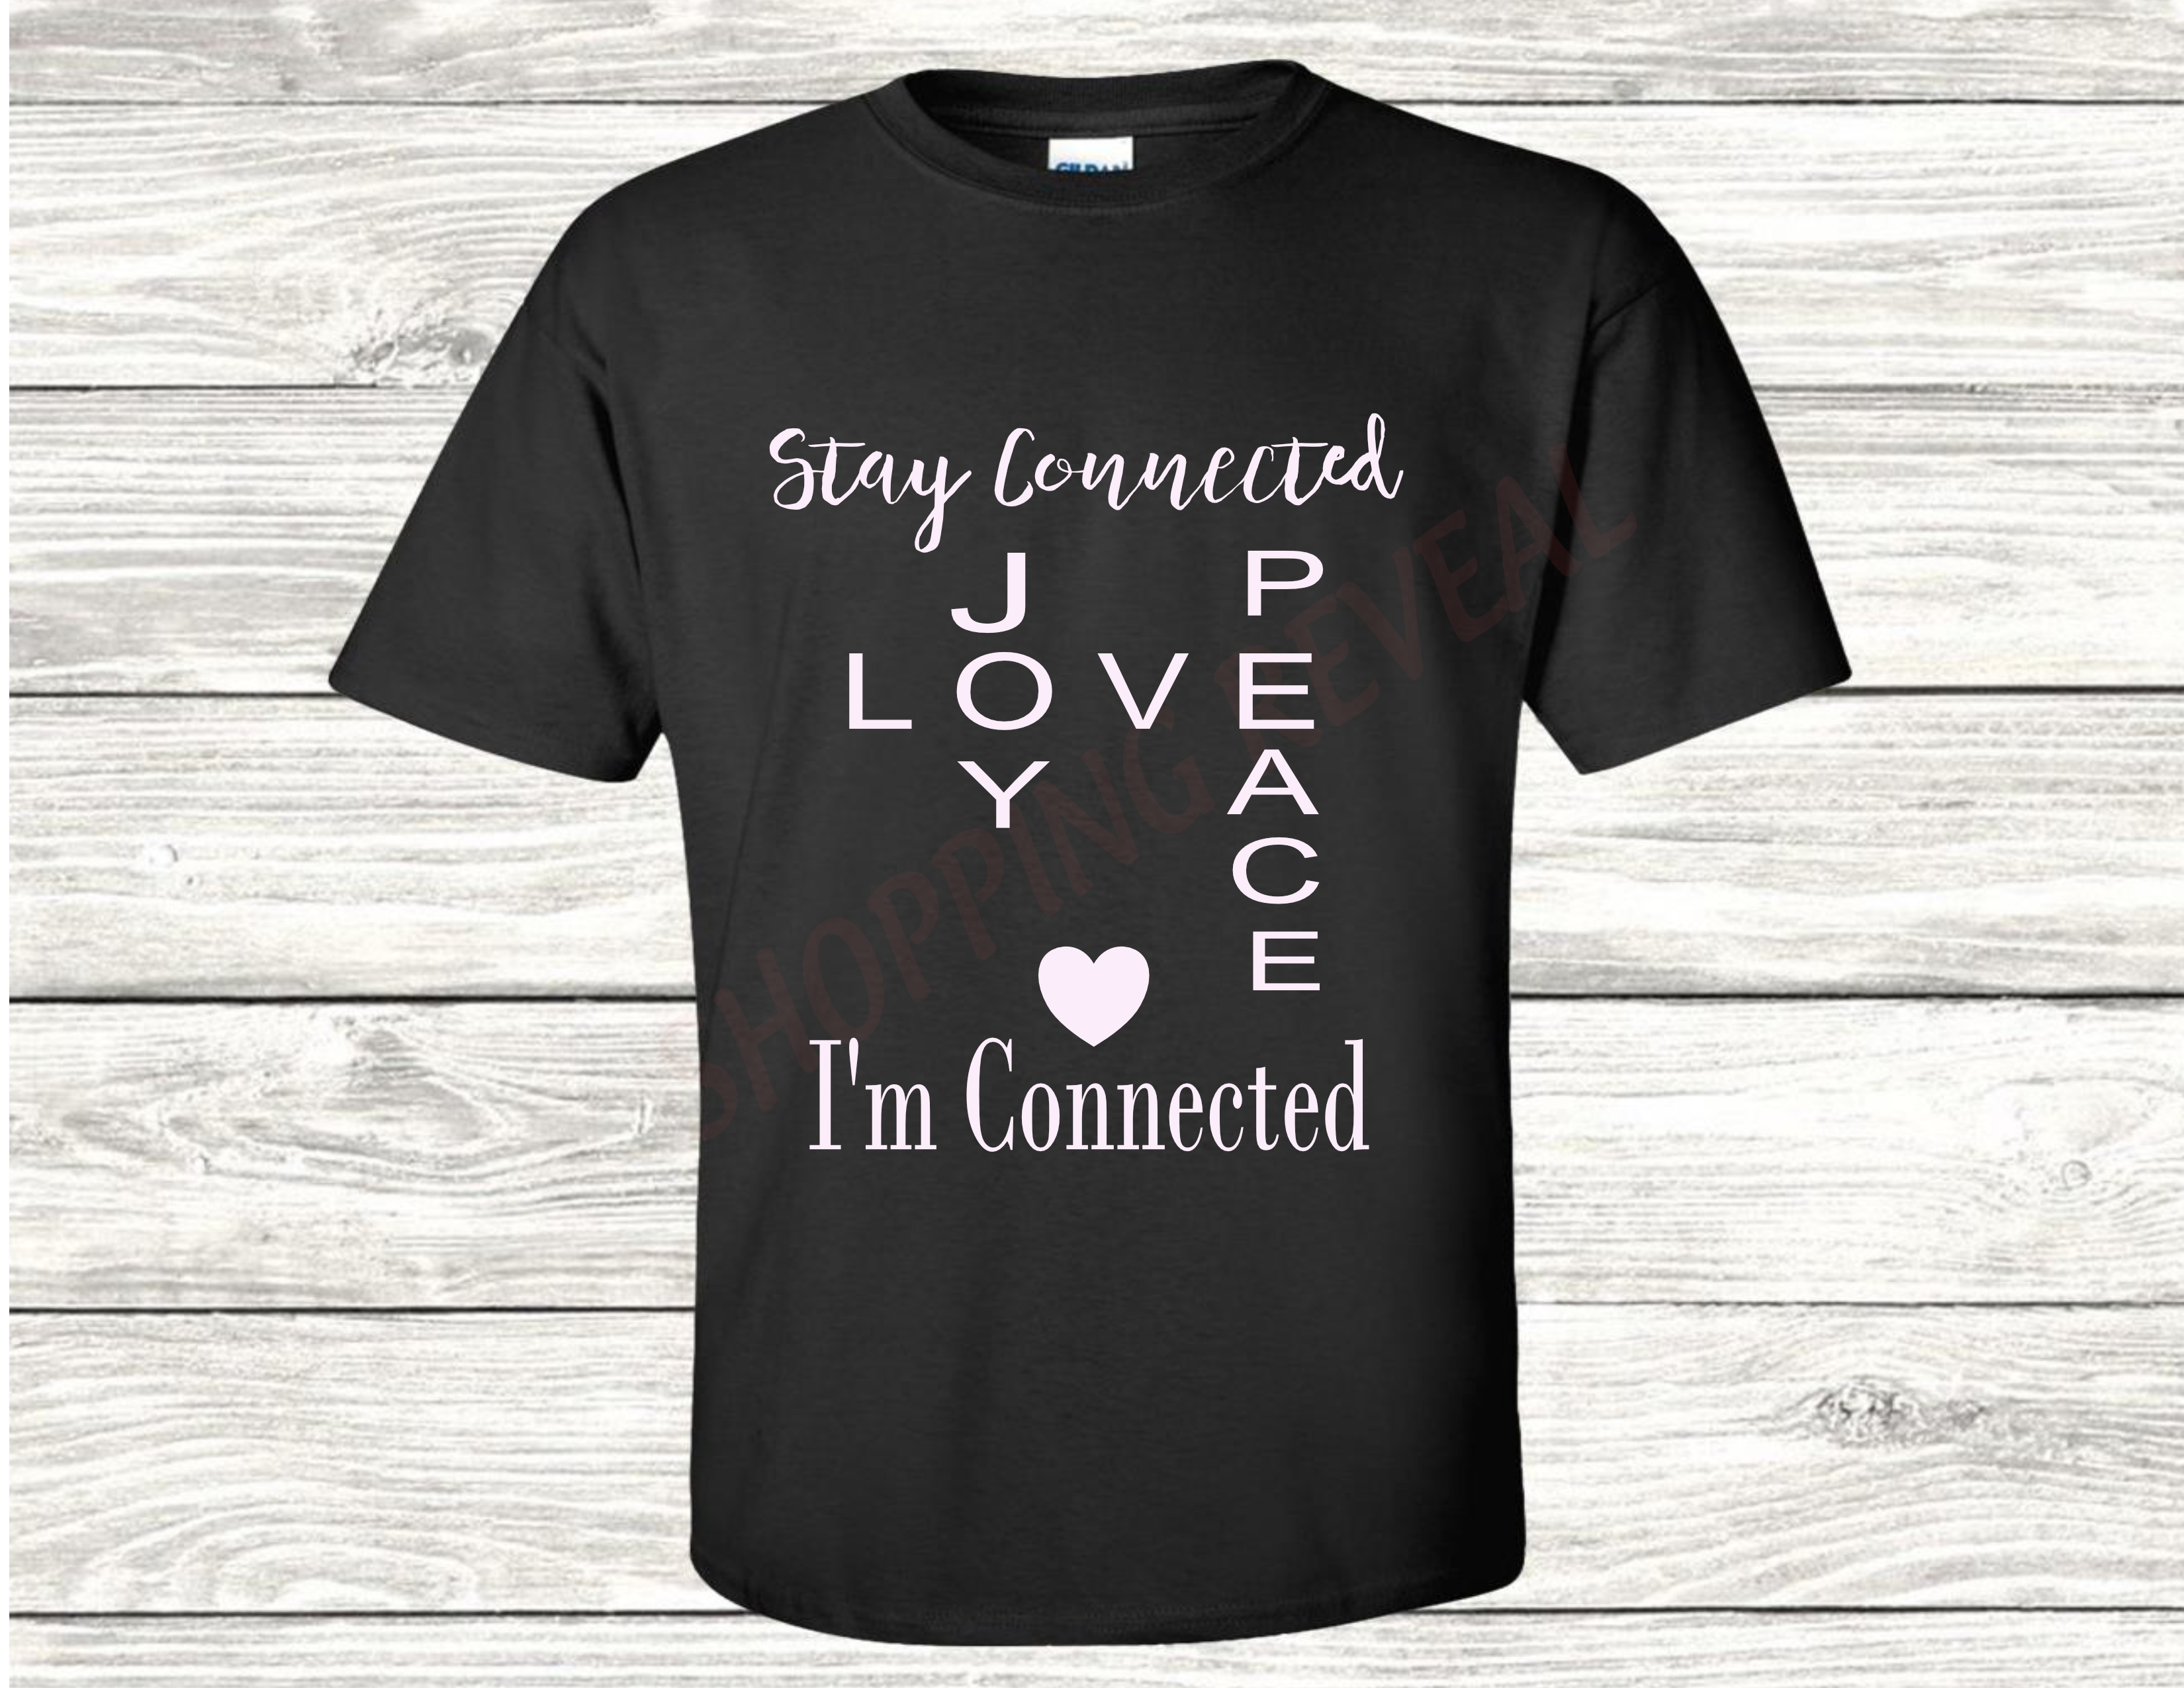 Shirt-Stay Connected